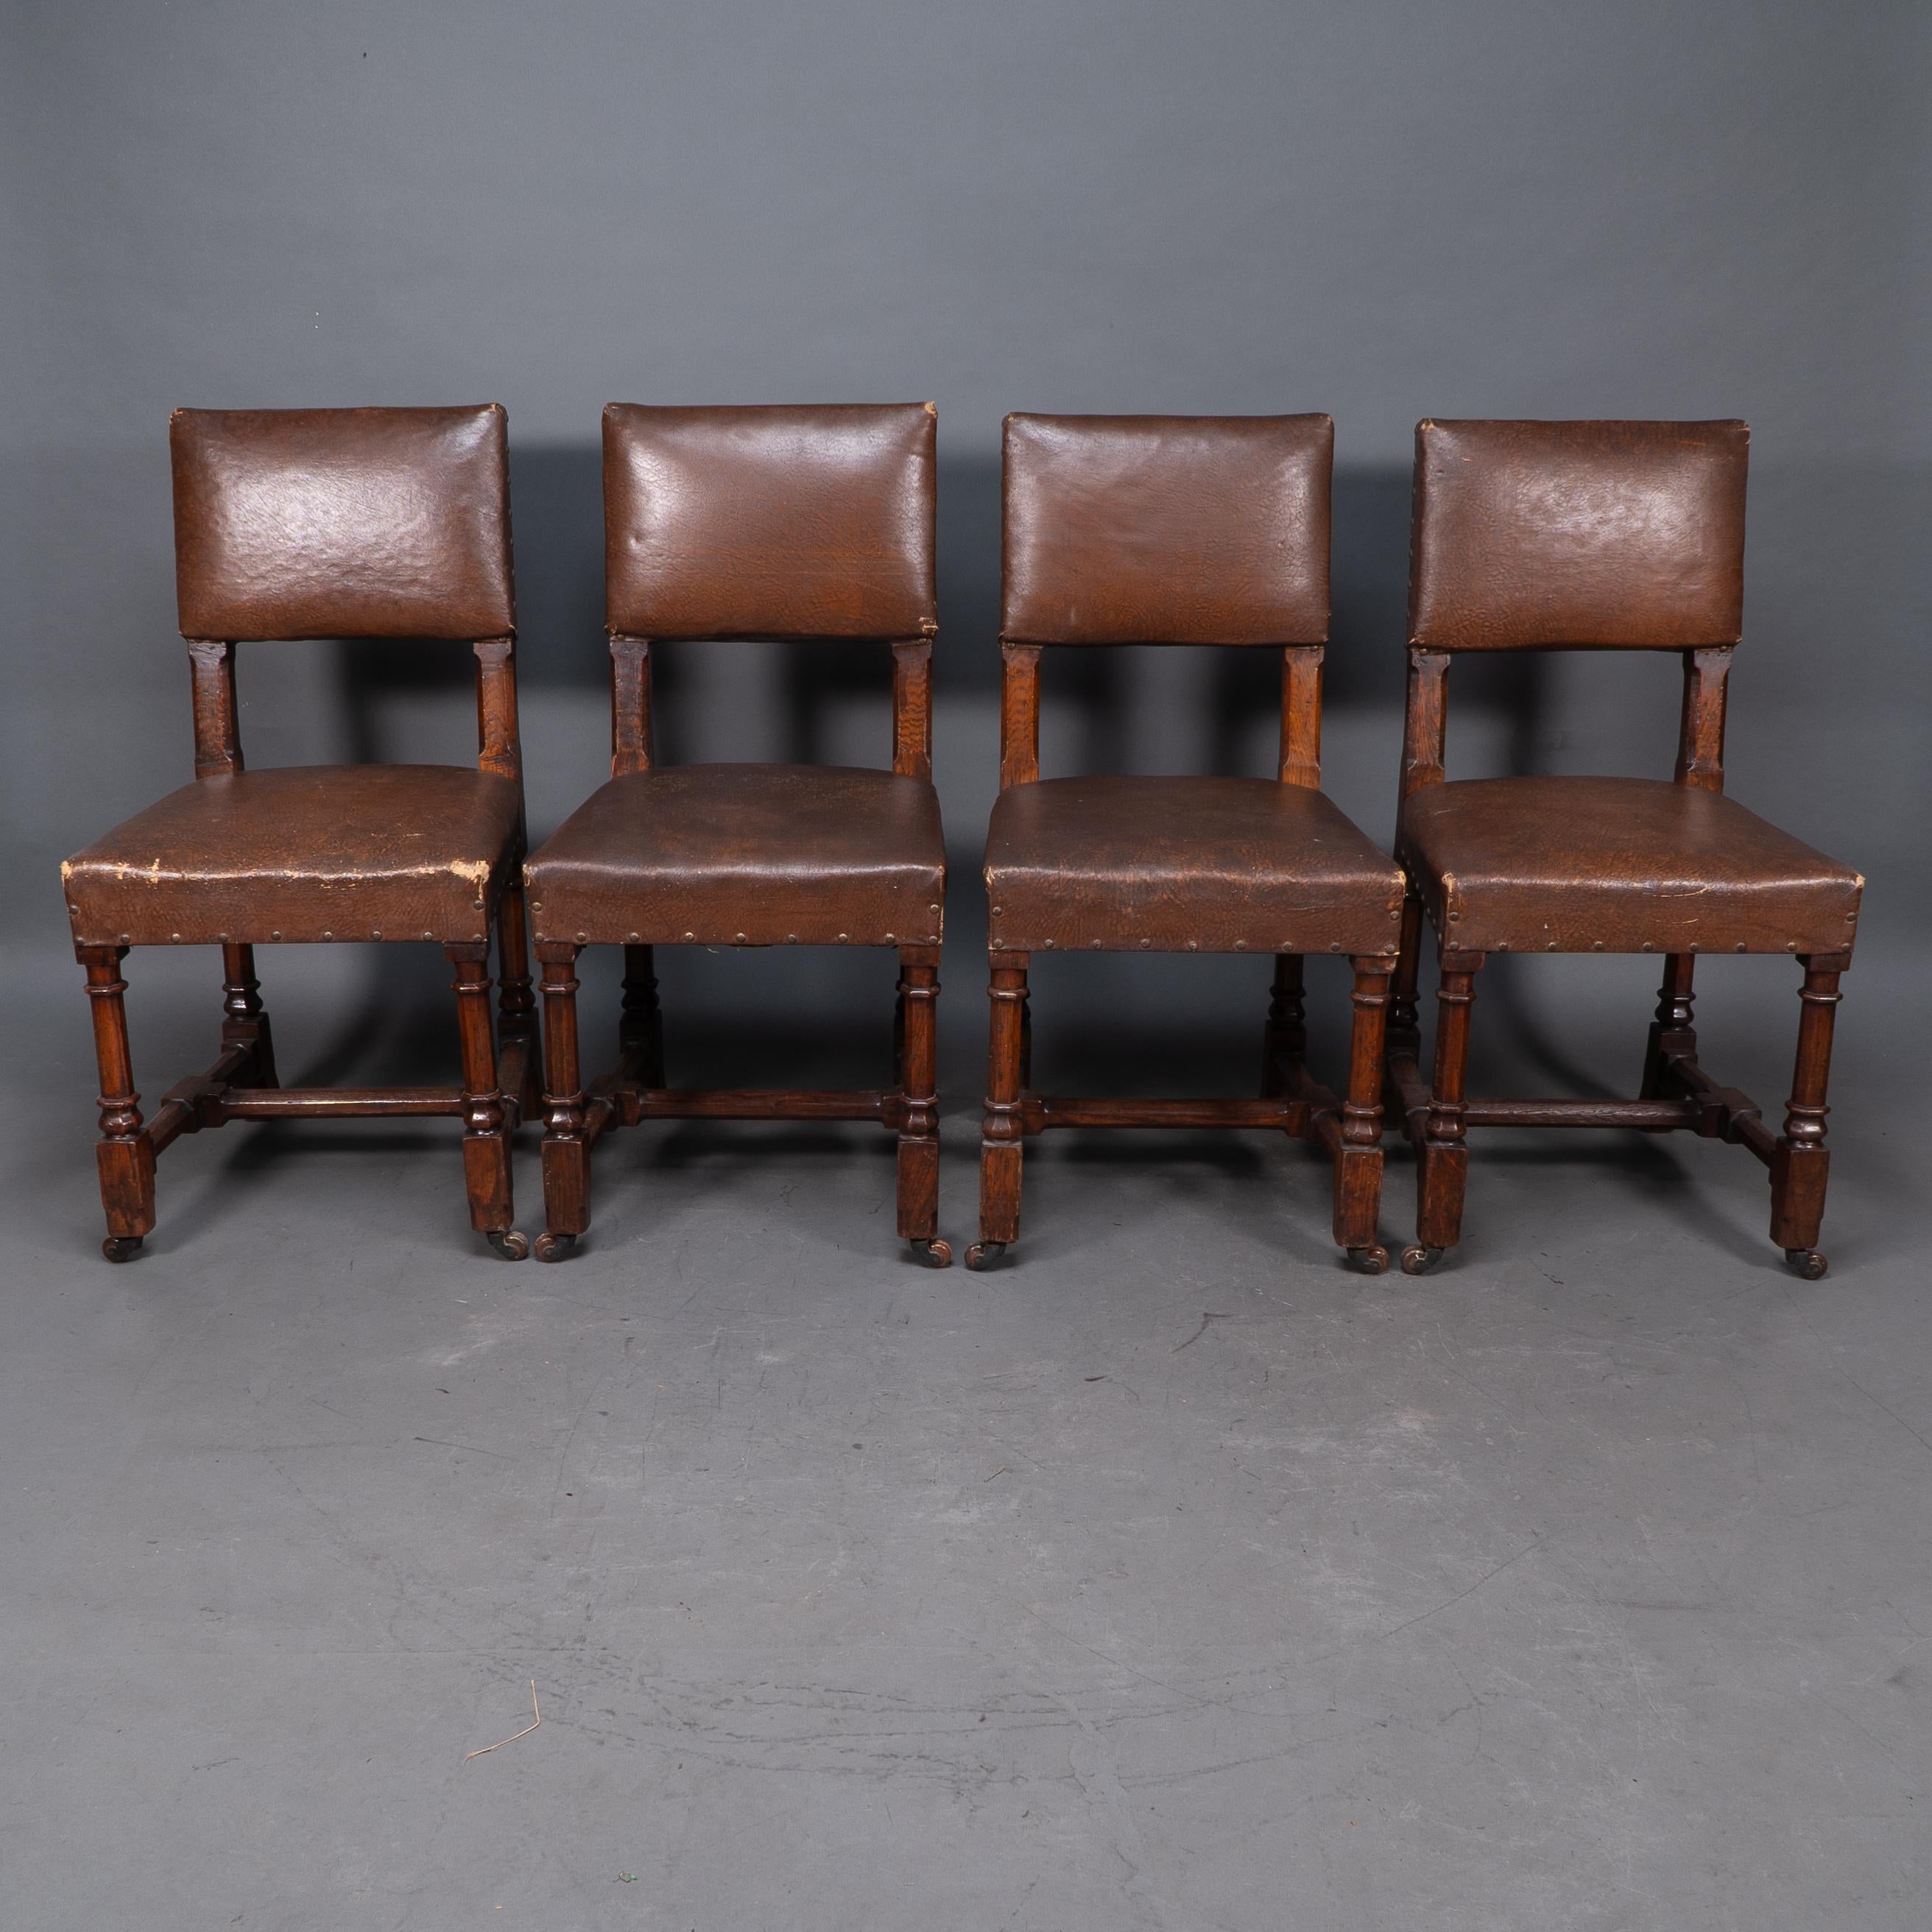 English AWN Pugin, Six Gothic Revival Oak Dining Chairs Probably for the House of Lords For Sale